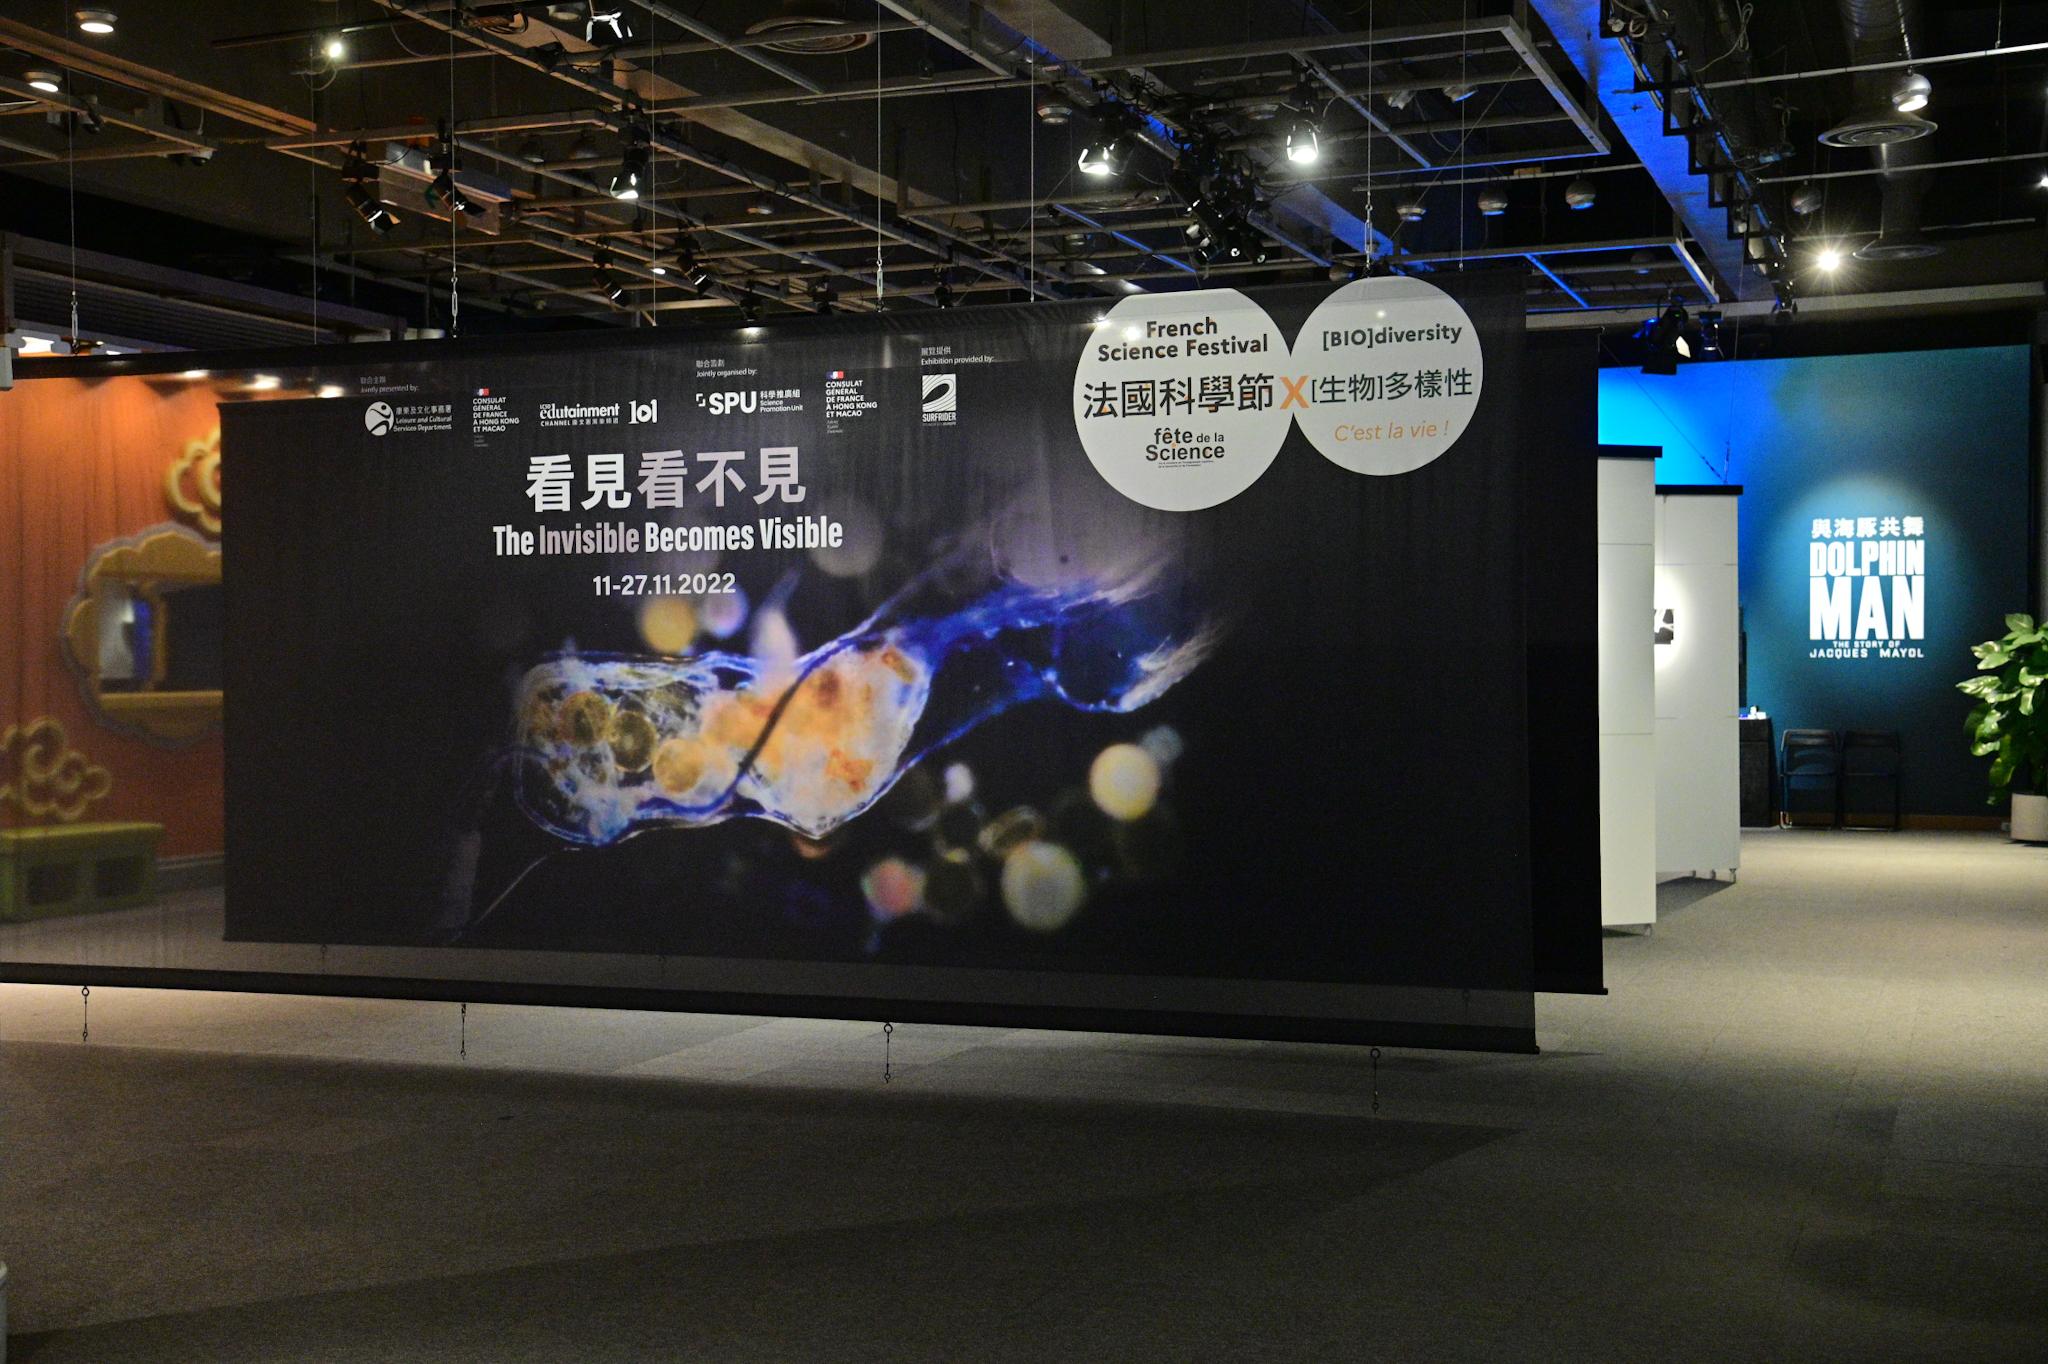 The exhibition “The Invisible Becomes Visible”, a highlight programme of French Science Festival: [BIO]diversity, will be staged at the Hong Kong Science Museum from tomorrow (November 11) to November 27.